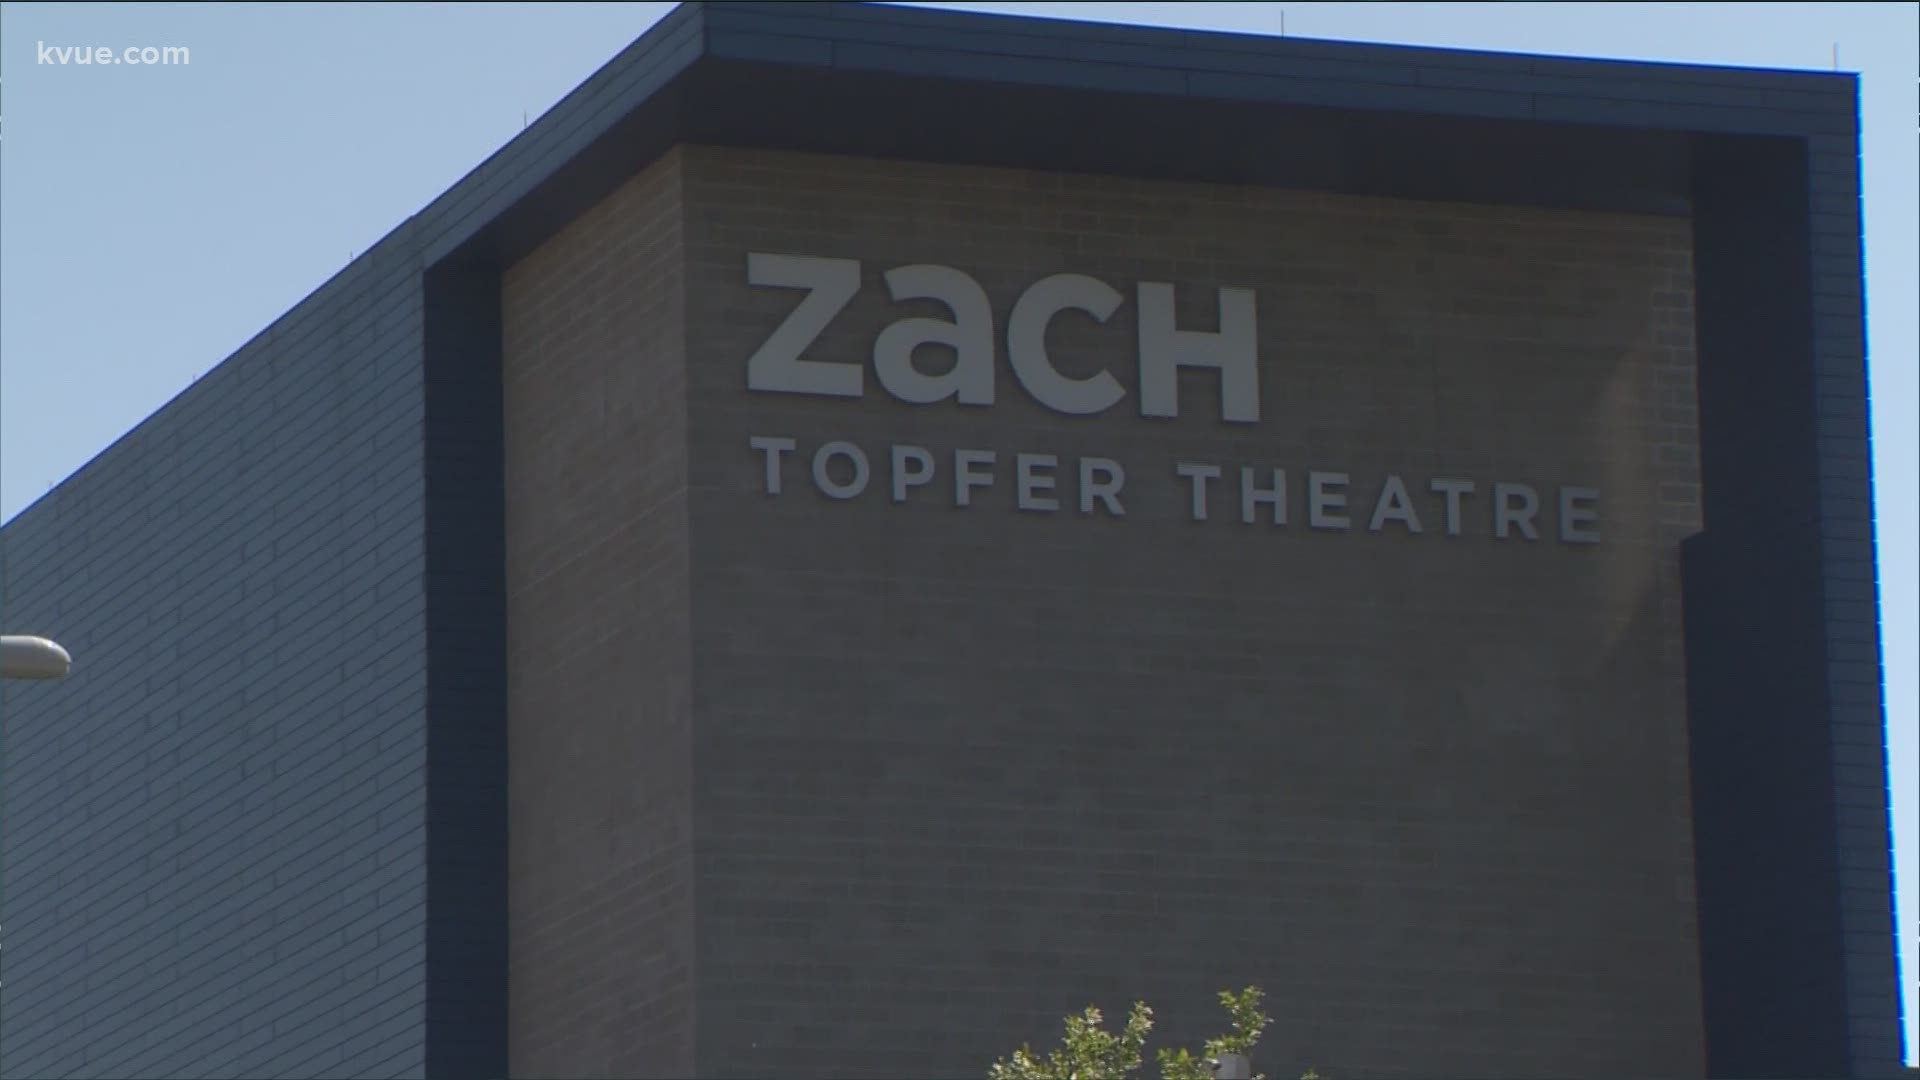 The ZACH Theatre is canceling the rest of its 2019-2020 season.